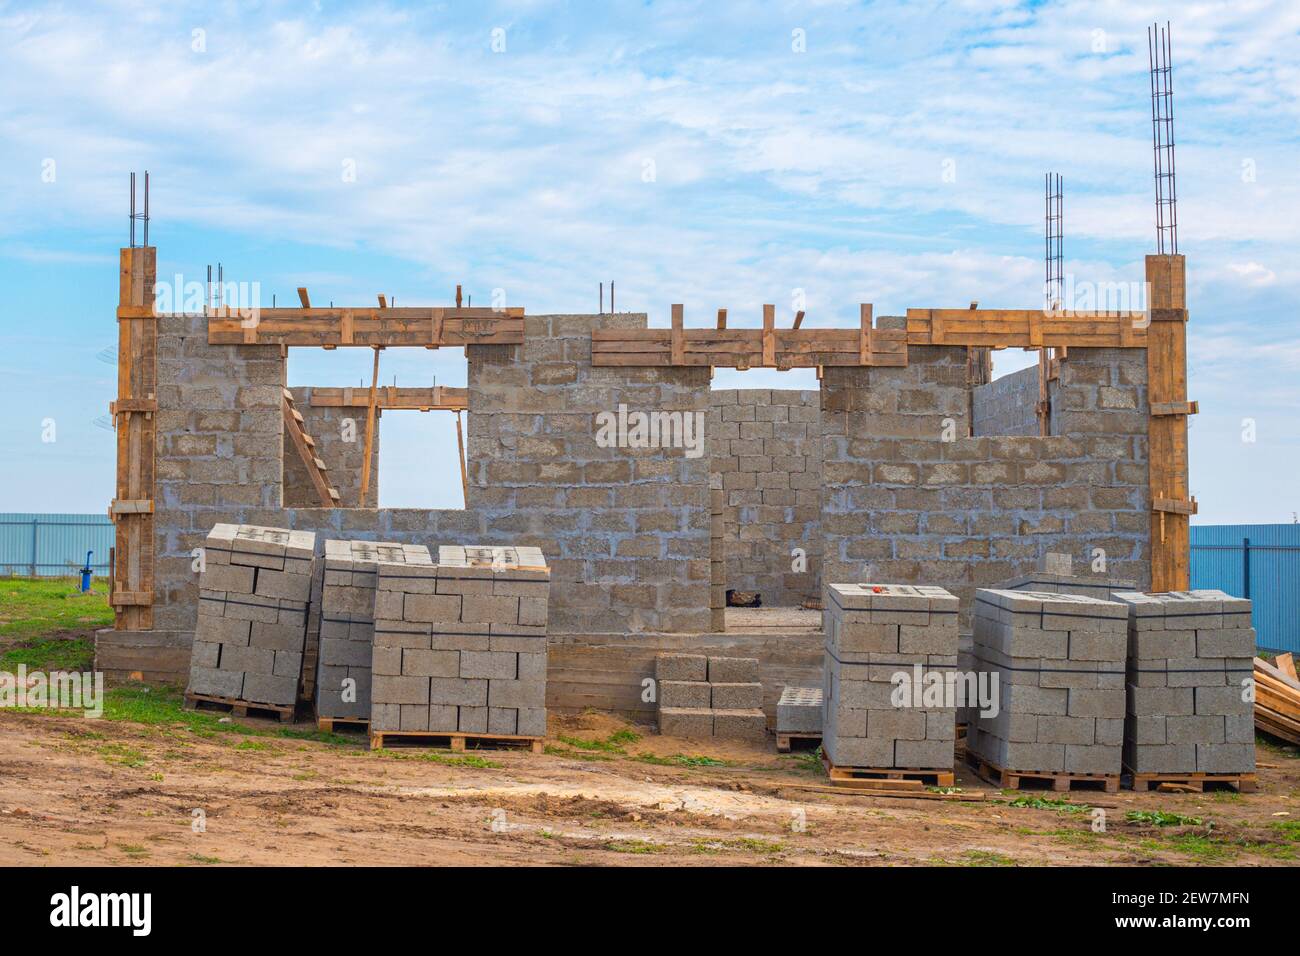 Construction stages. Cinder block country house with protruding fittings, ground floor. The building material is stacked on pallets. Stock Photo